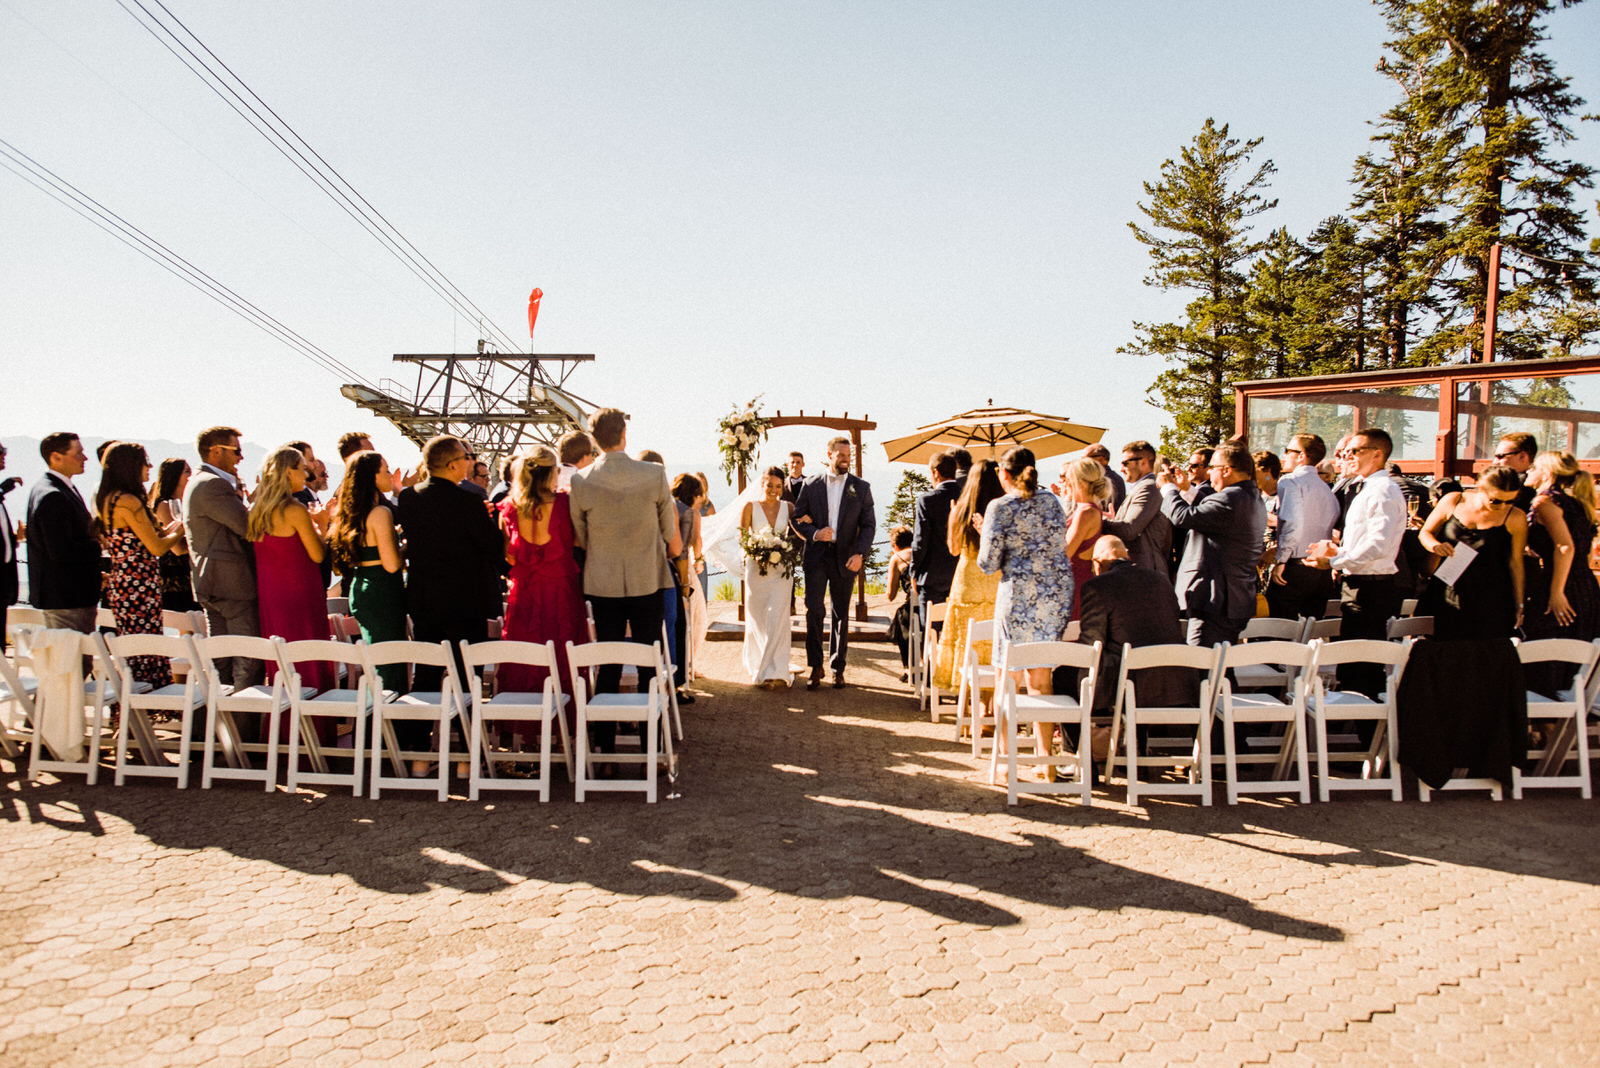 Bride and groom recessional at intimate south lake tahoe summer wedding ceremony at heavenly lodge